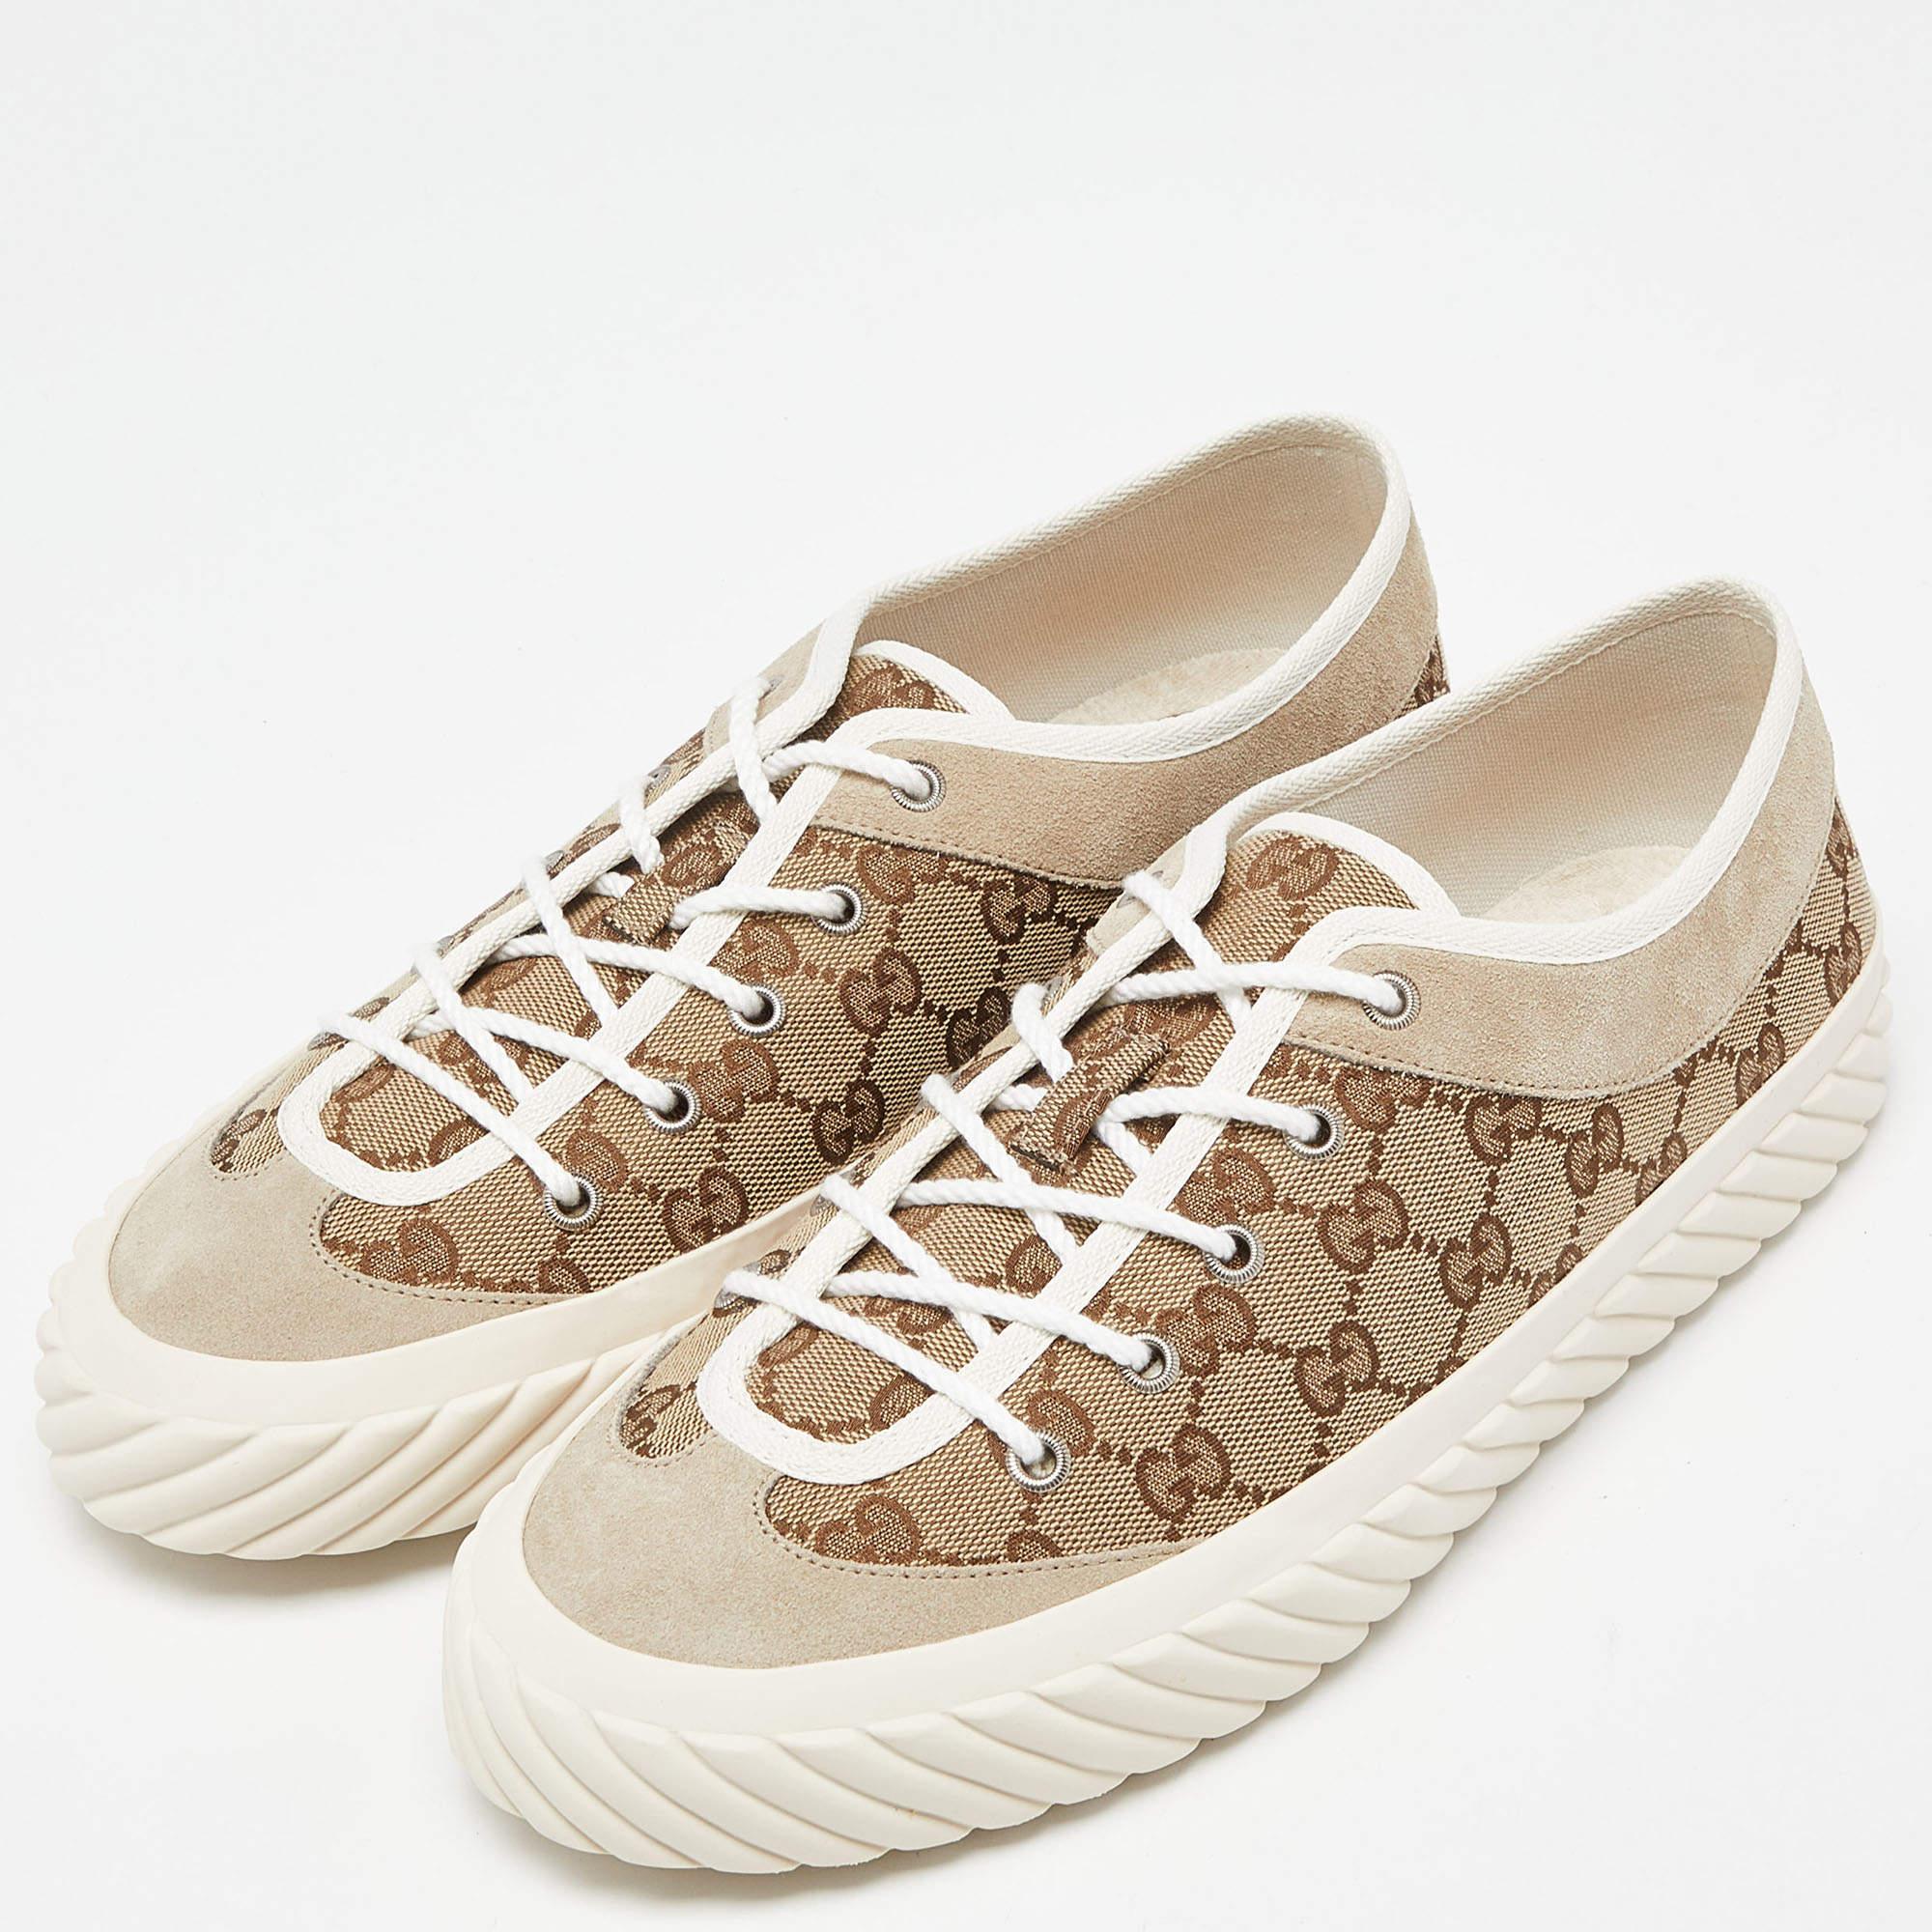 Gucci Gucci Brown/Beige GG Canvas and Suede Sneakers Size 43.5 For Sale 2